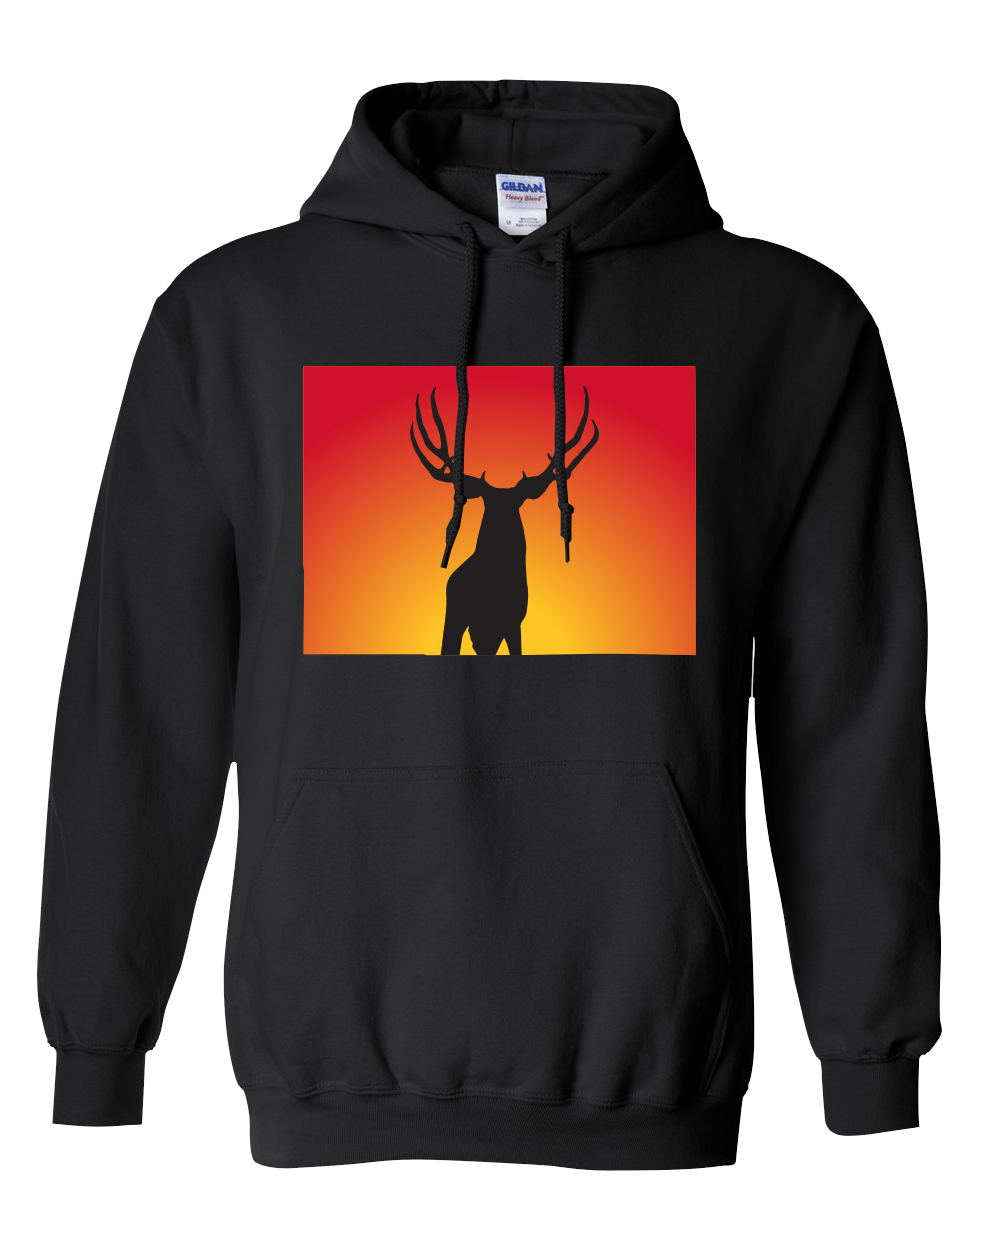 Pullover Hooded Sweatshirt Colorado Black Mule Deer Vibrant Design High Quality Tight Knit Ring Spun Low Maintenance Cotton Printed With The Newest Available Color Transfer Technology